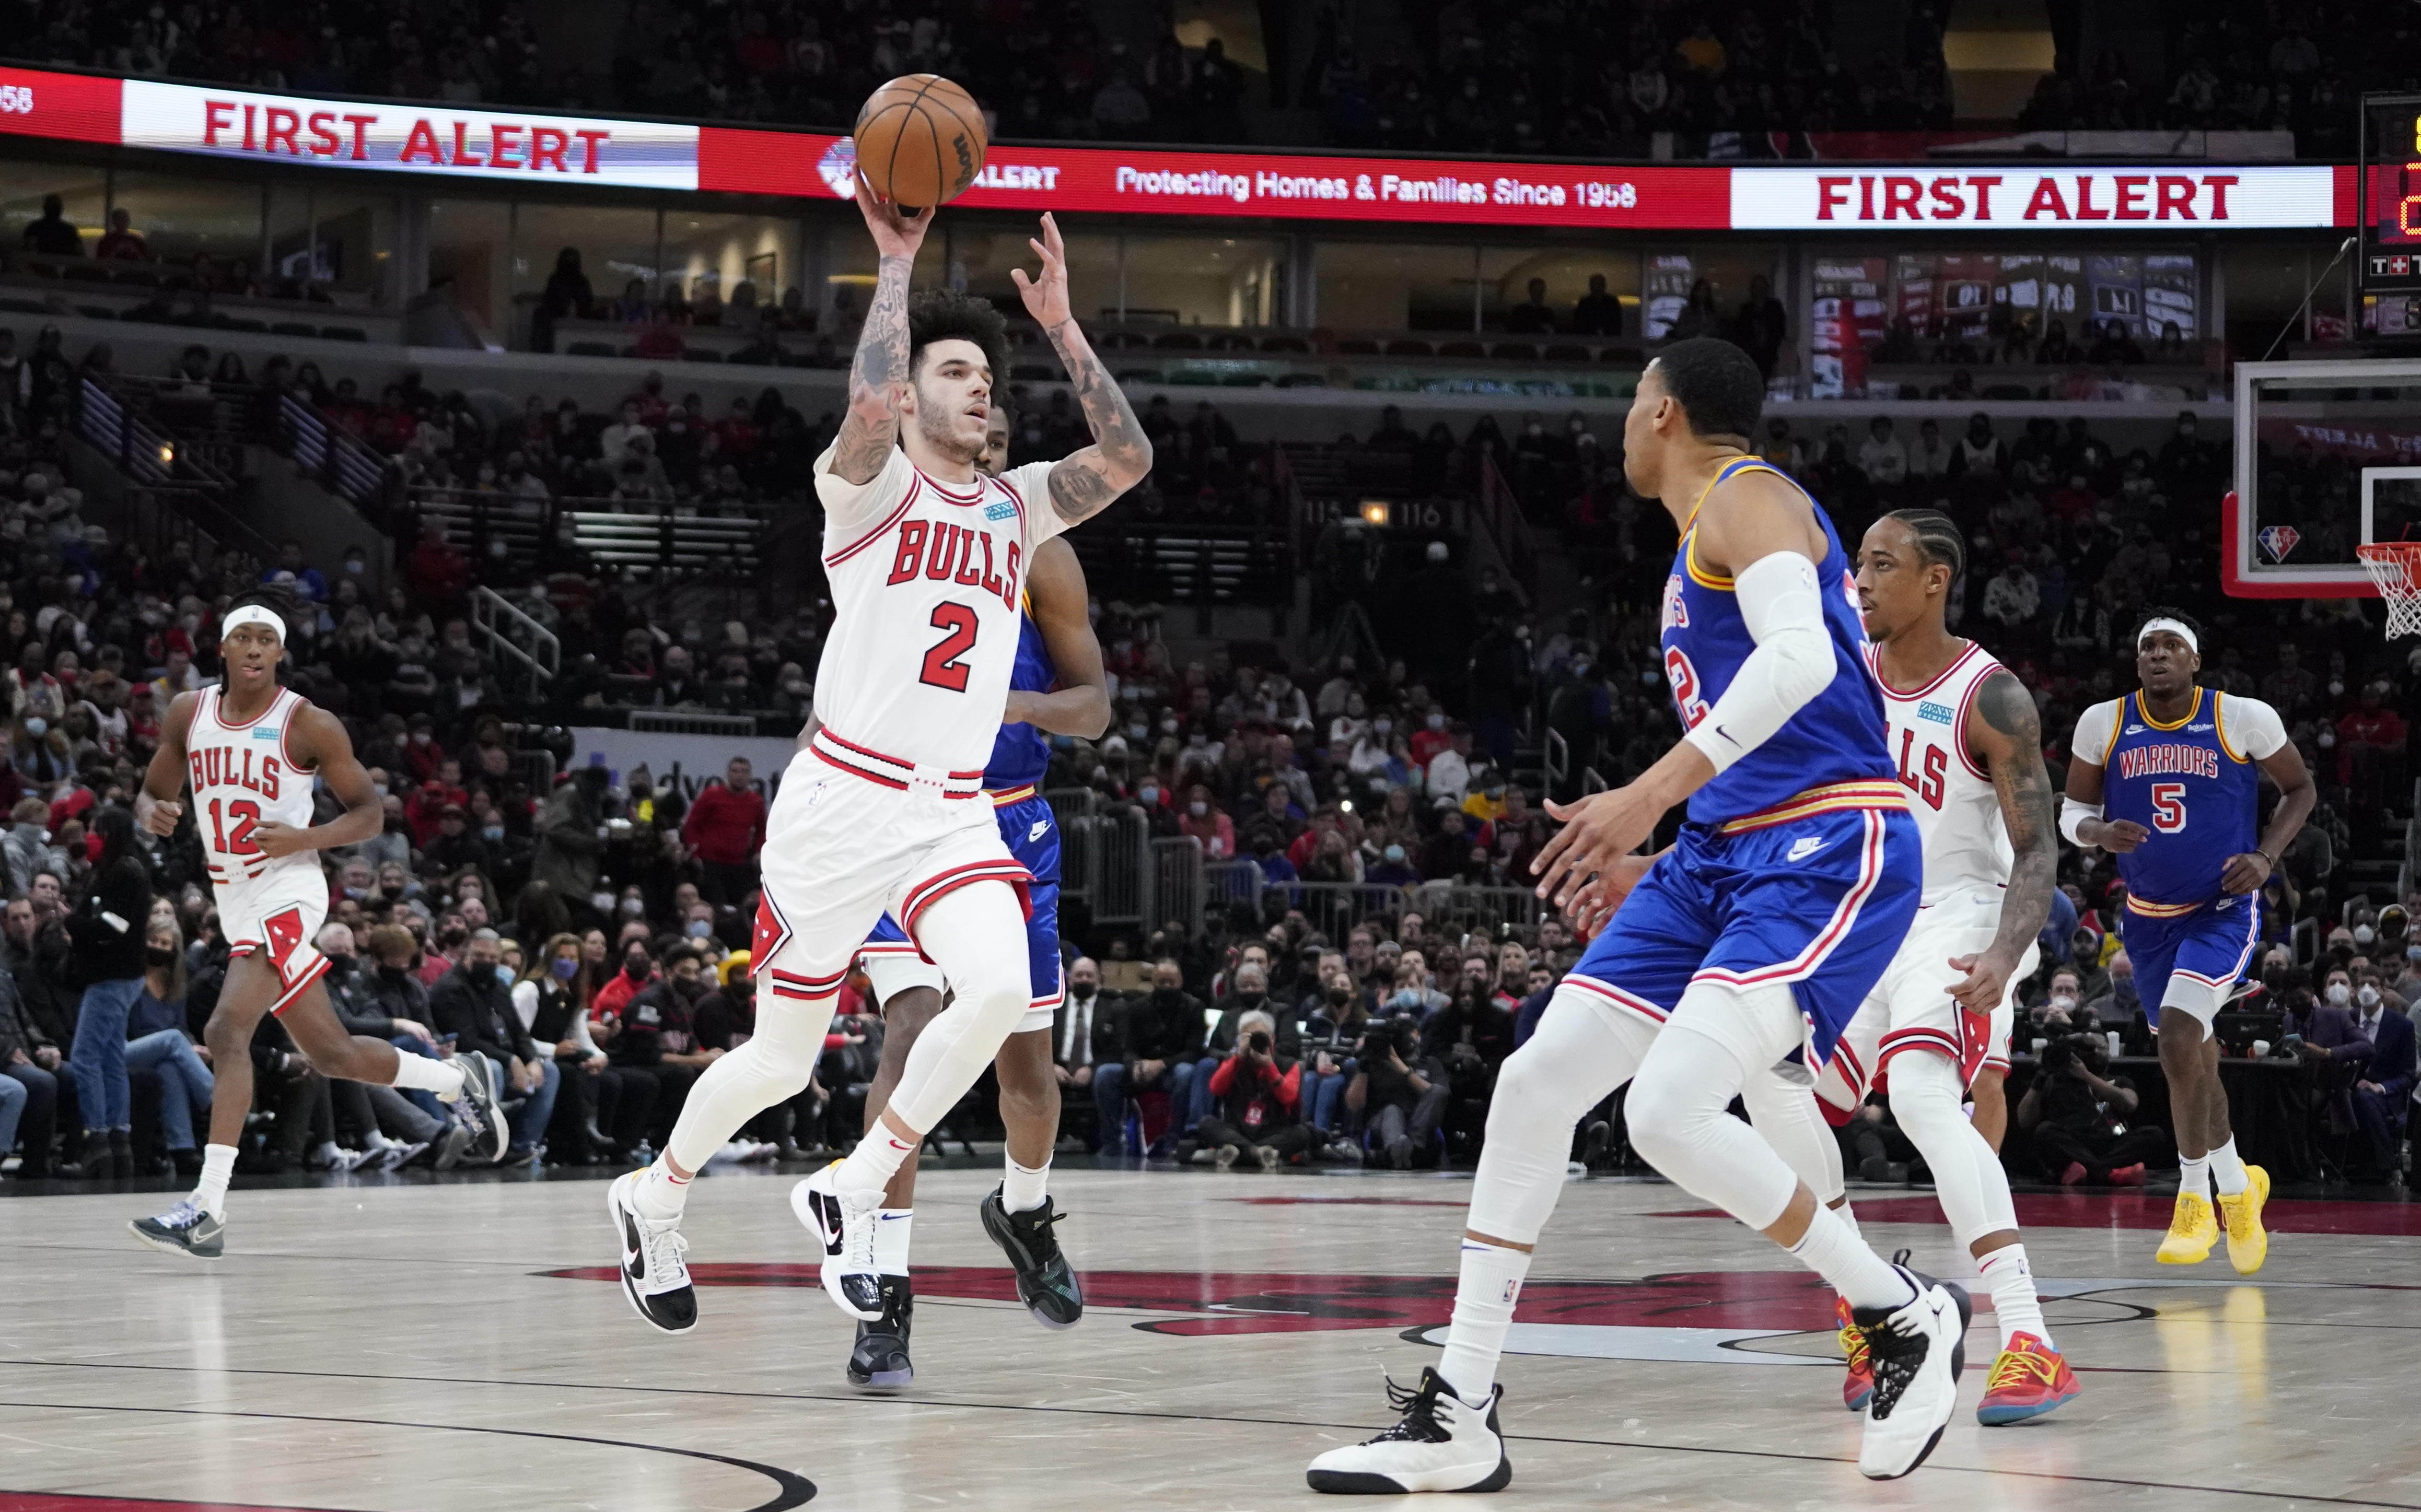 Chicago Bulls guard Lonzo Ball (2) looks to pass the ball against the Golden State Warriors during the first half at United Center.